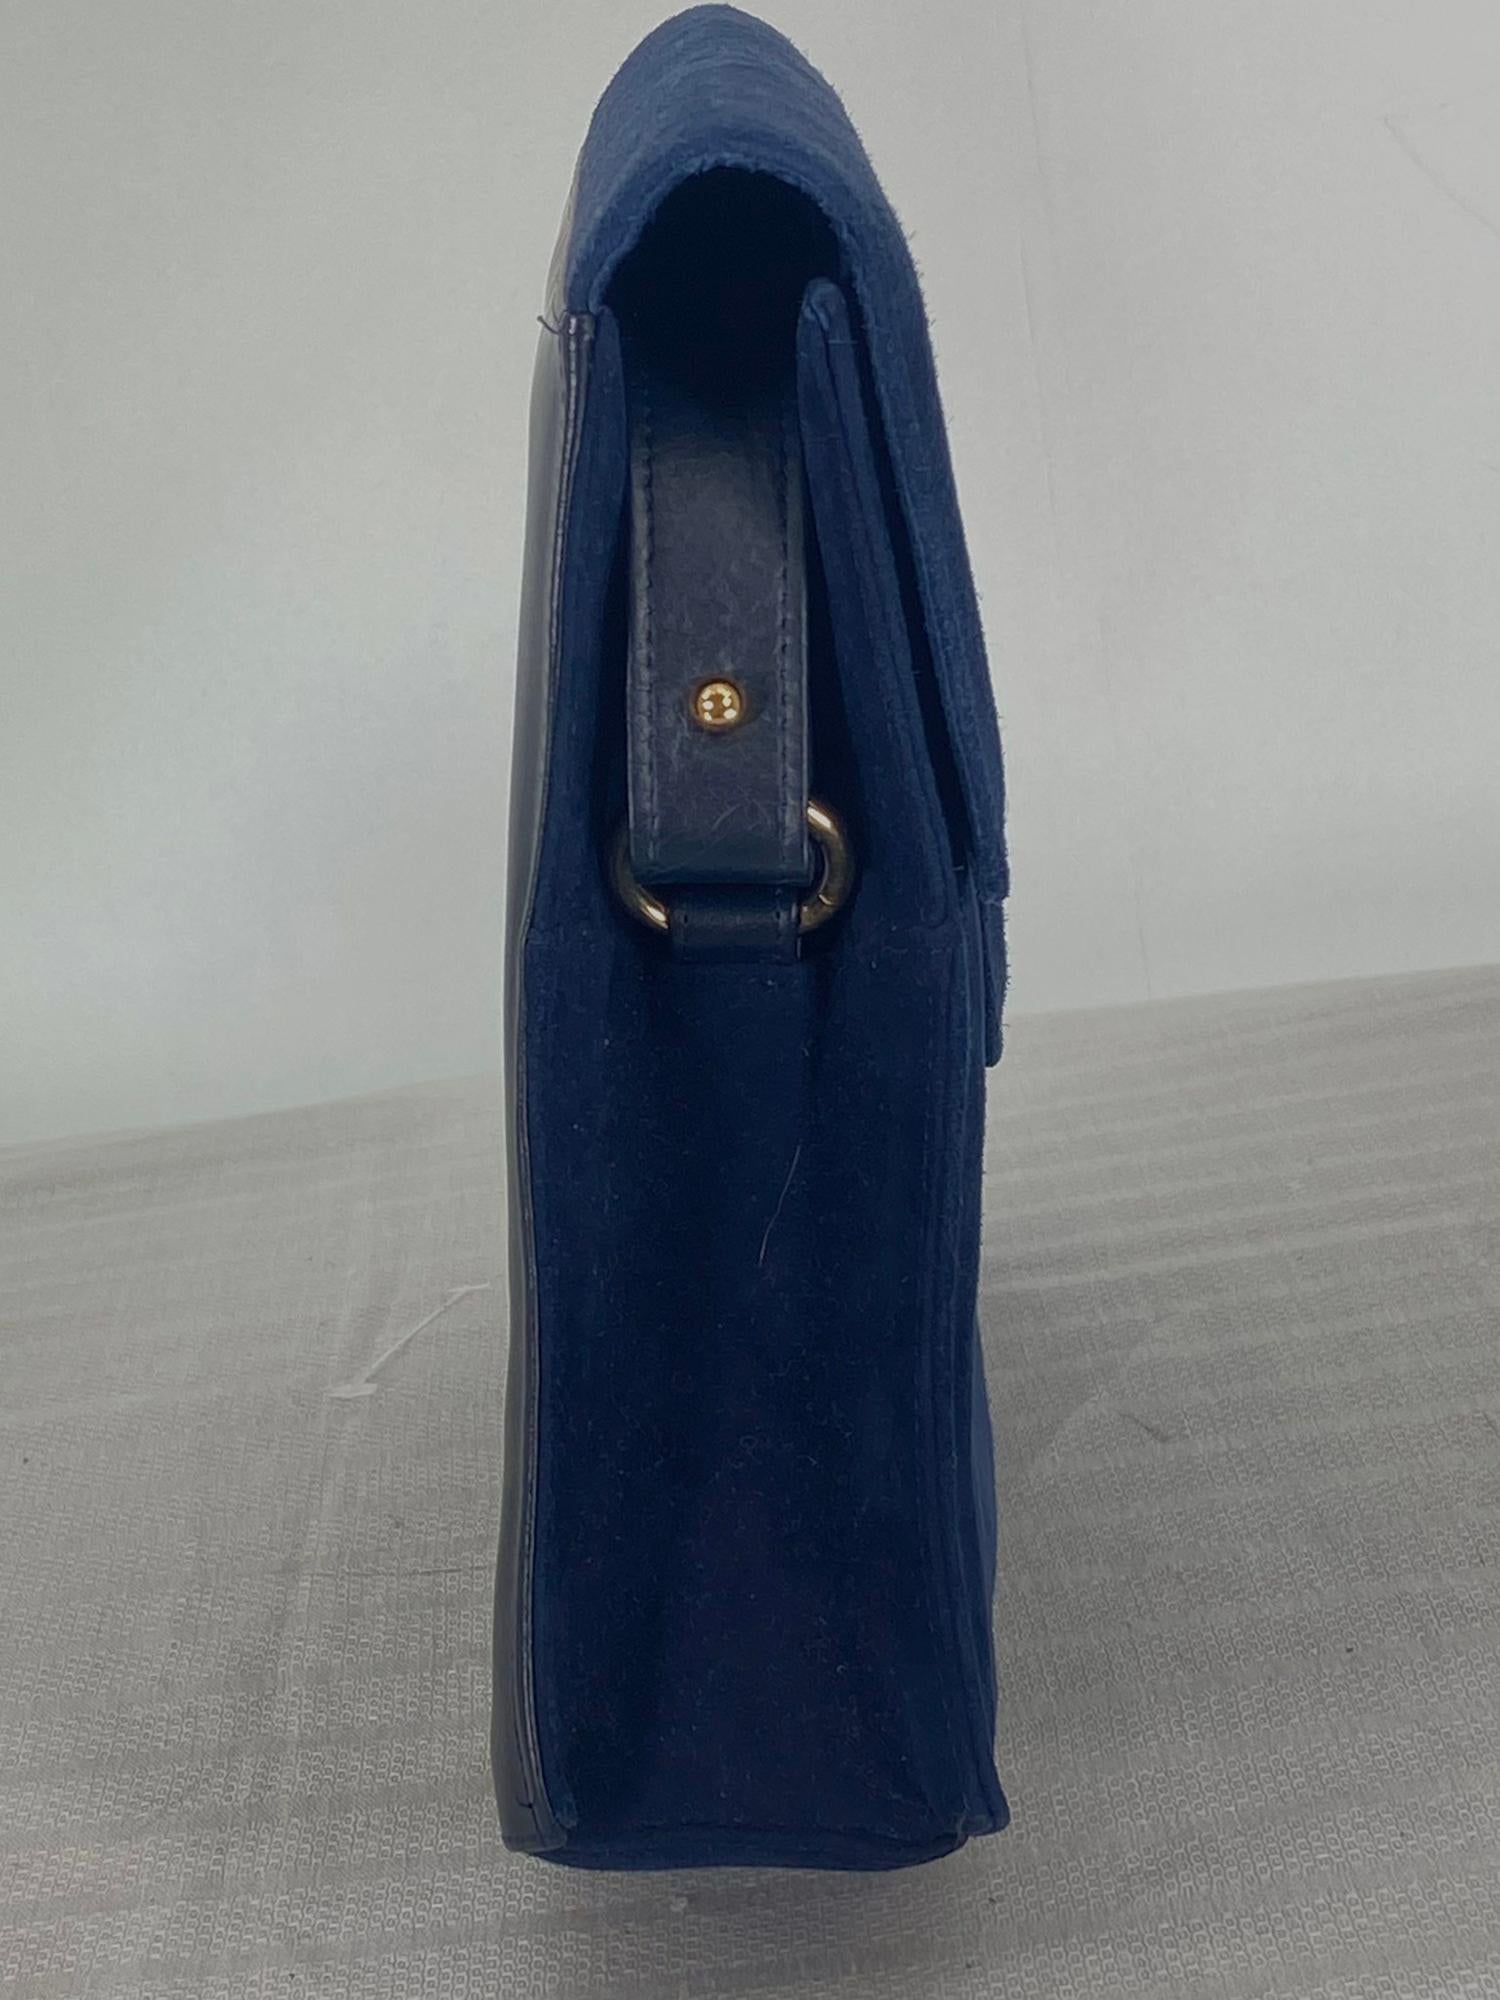 Charles Jourdan navy blue suede & leather shoulder bag with gold hardware from the 1990s. Structured bag with a shaped front flap that has a gold metal bar/hidden magnetic snap closure. The bag front and sides are navy blue suede, the bag back is